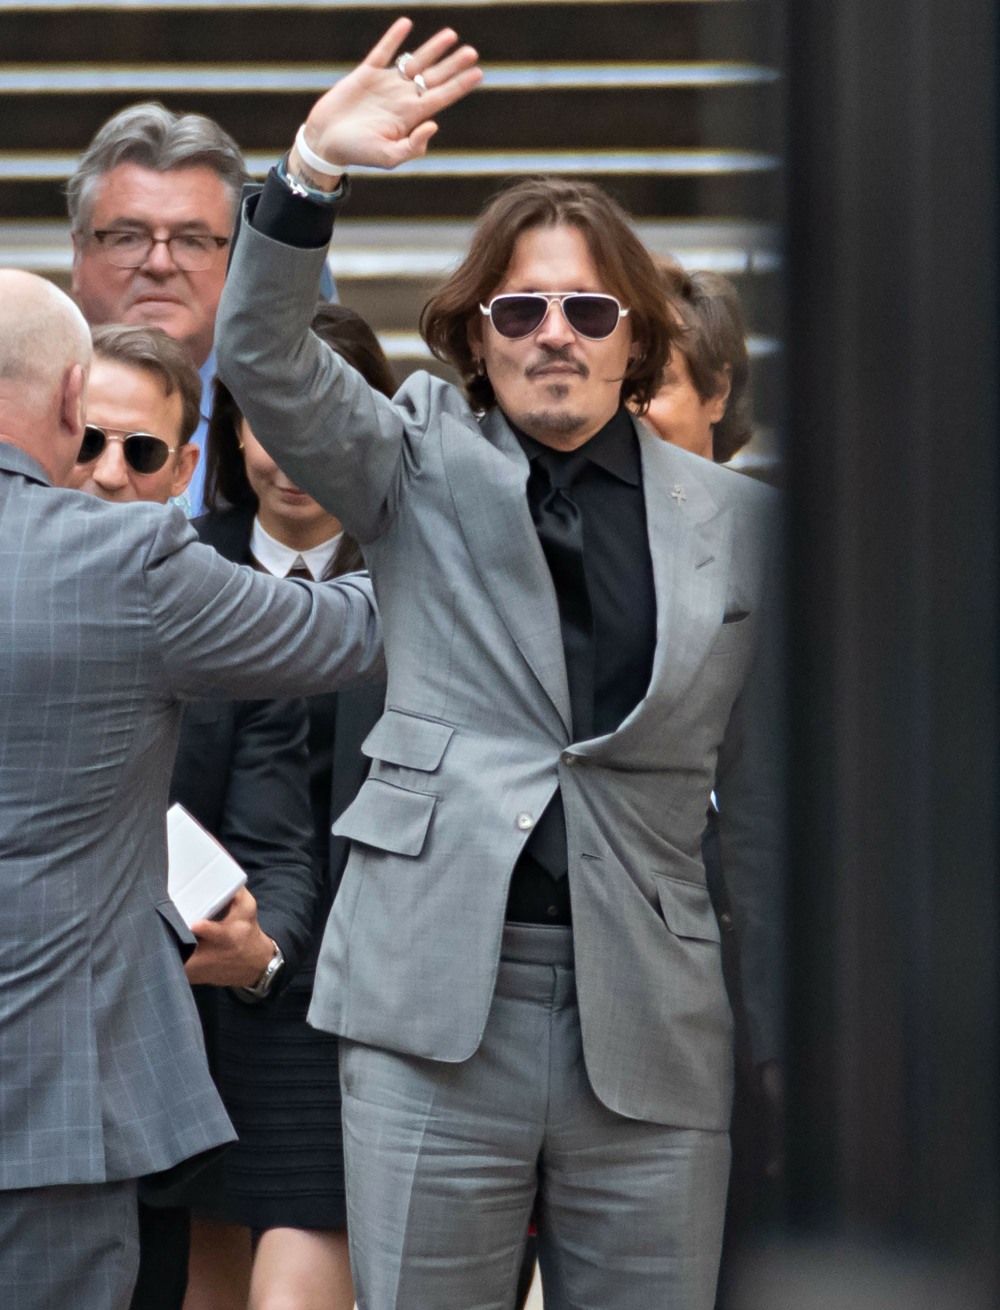 Johnny Depp at The Royal Courts of Justice, London, UK - 28 July 2020